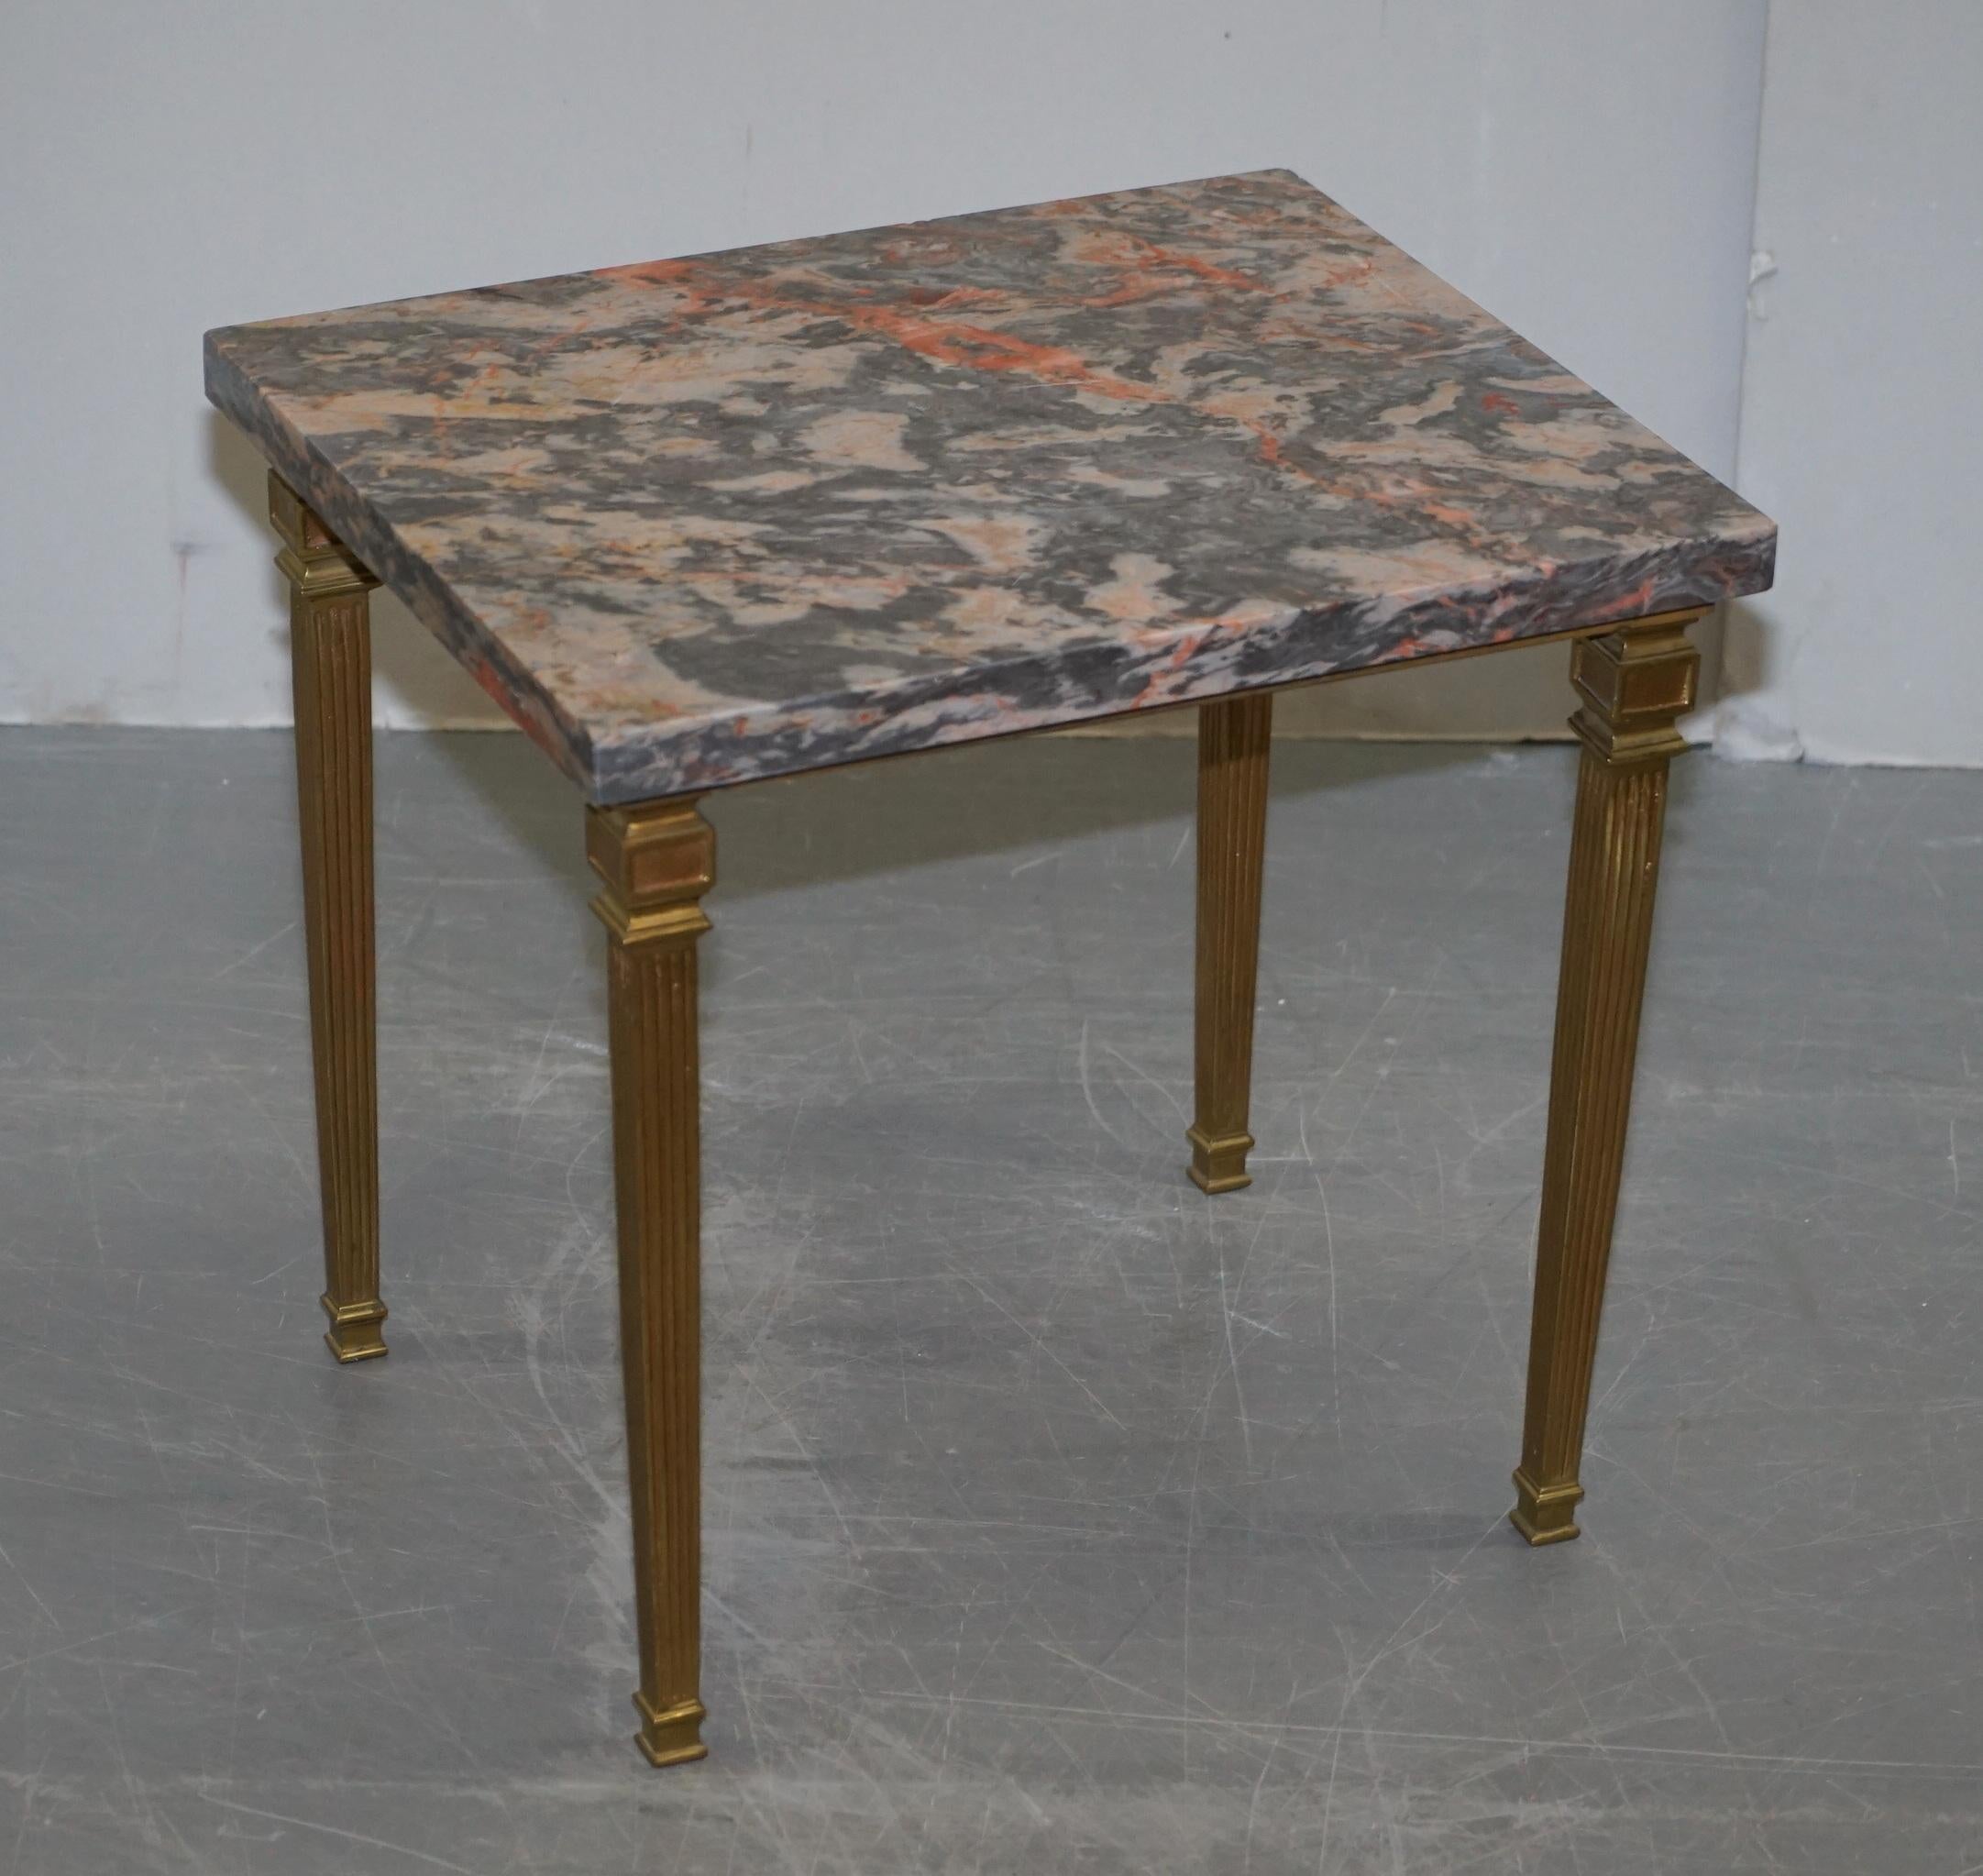 We are delighted to offer for sale this lovely pair of vintage gold gilt bronze side tables with thick heavy marble tops

A very good looking and decorative pair of side tables. The marble tops are very very thick and extremely heavy. The gilt